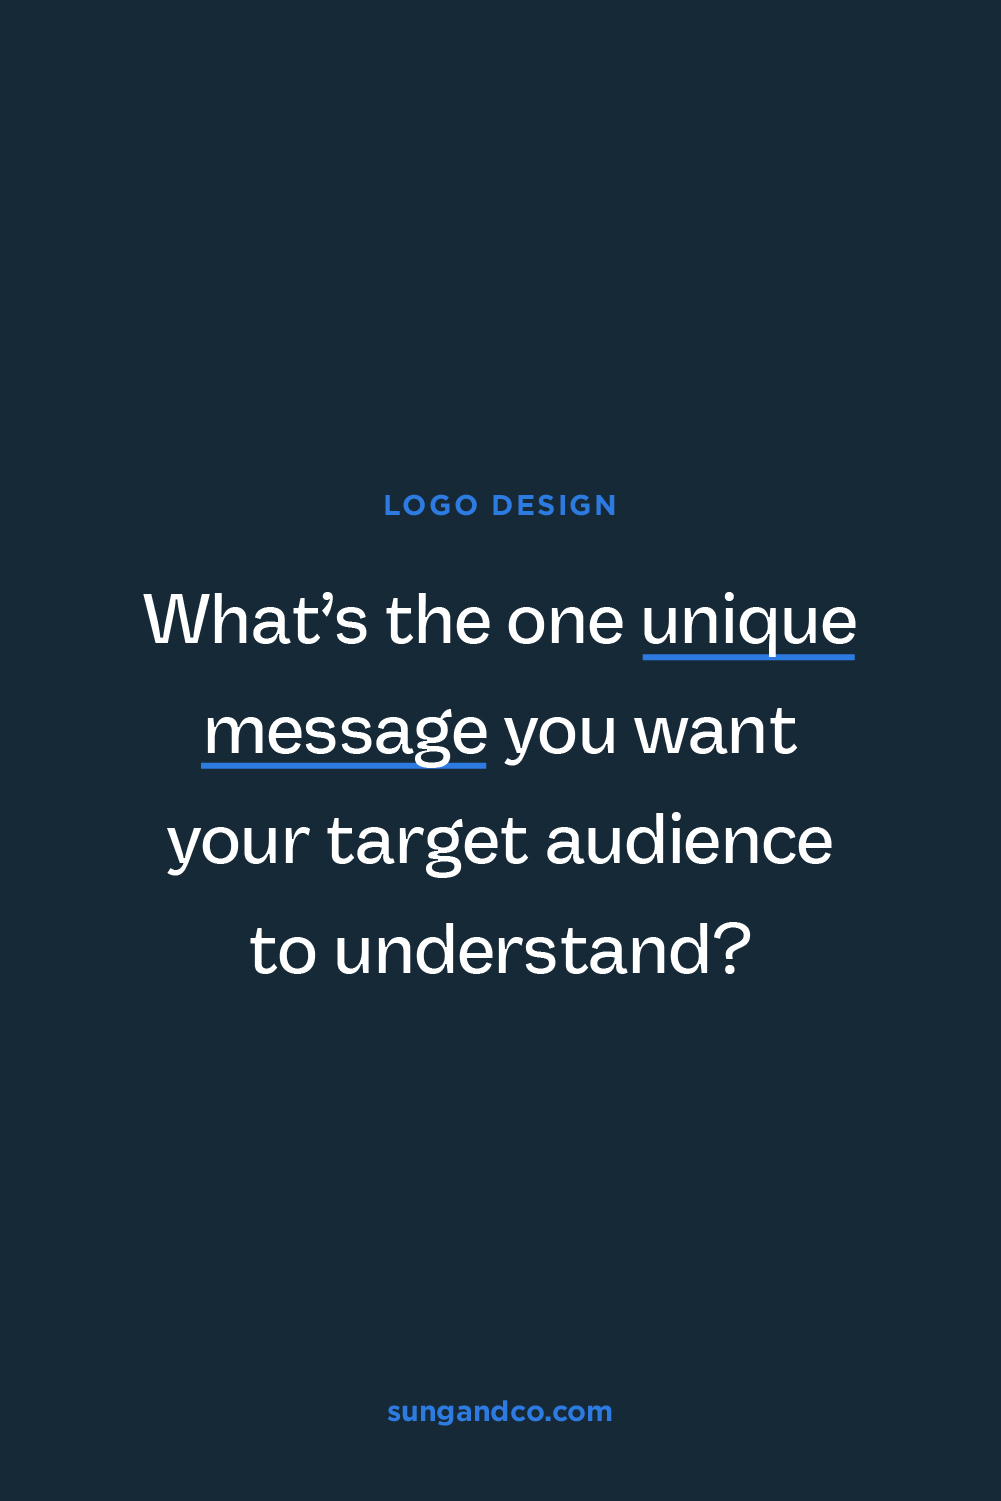 What's the unique message you want your target audience to understand?